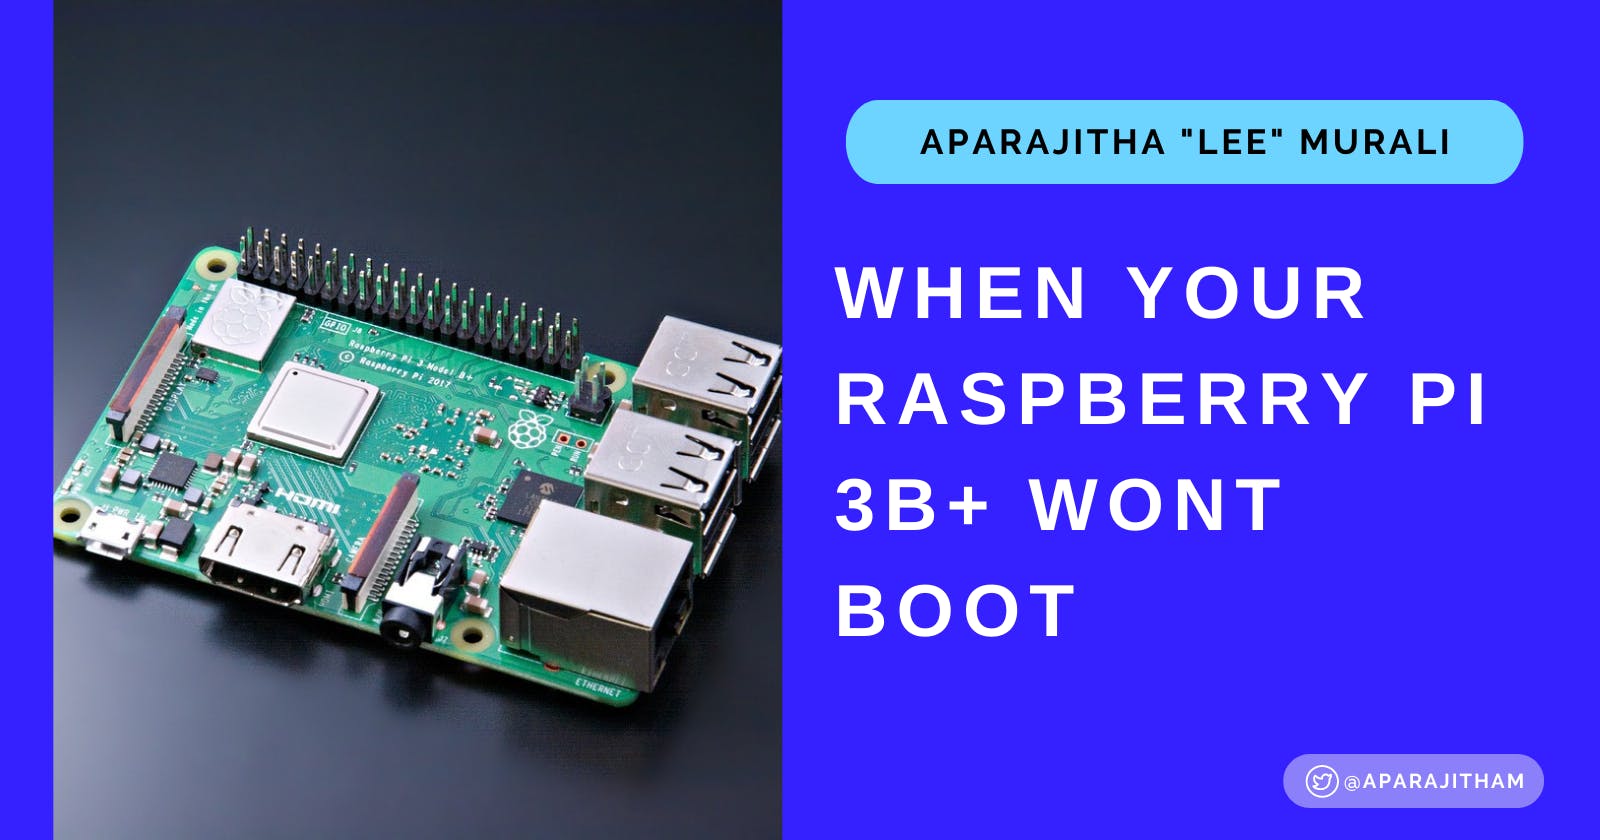 What to do when your raspberry pi 3B+ has only a red LED and won't boot